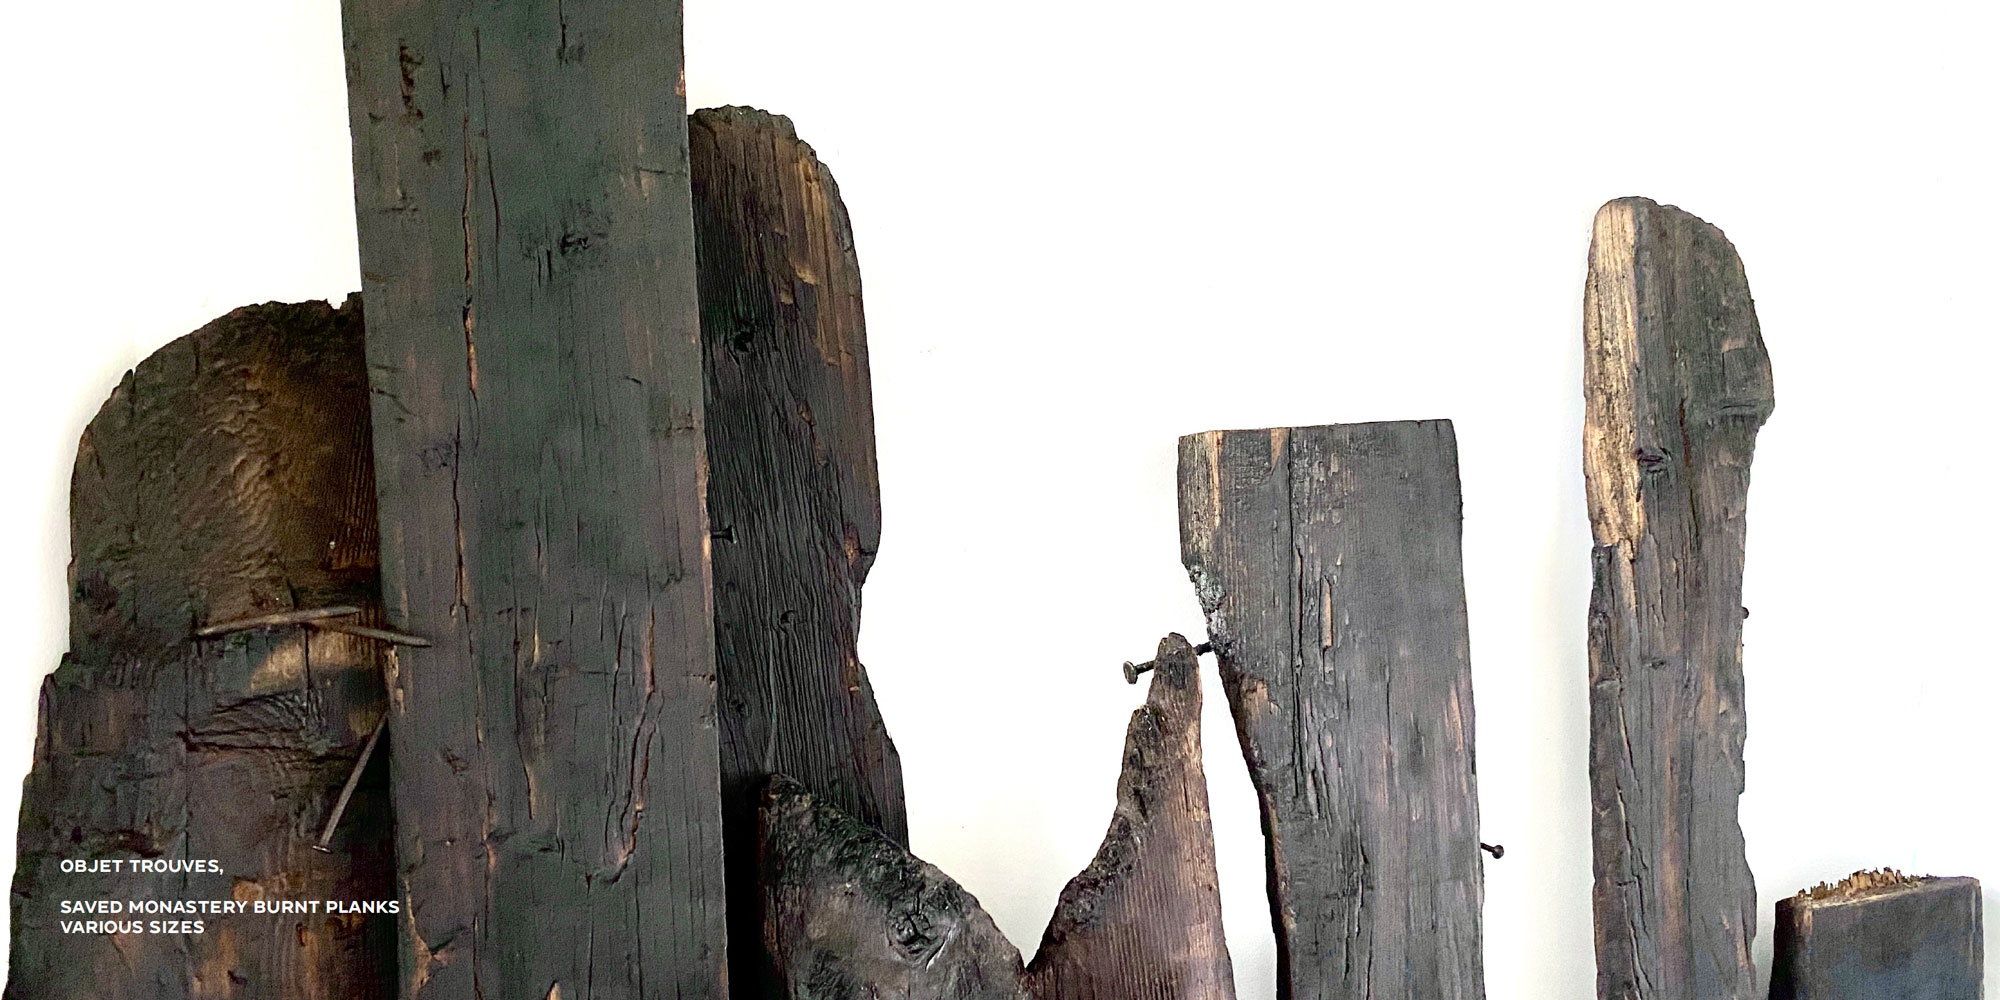 A series of burnt wooden floor boards with nails sticking out from them. The wooden planks are lined up against a white background.